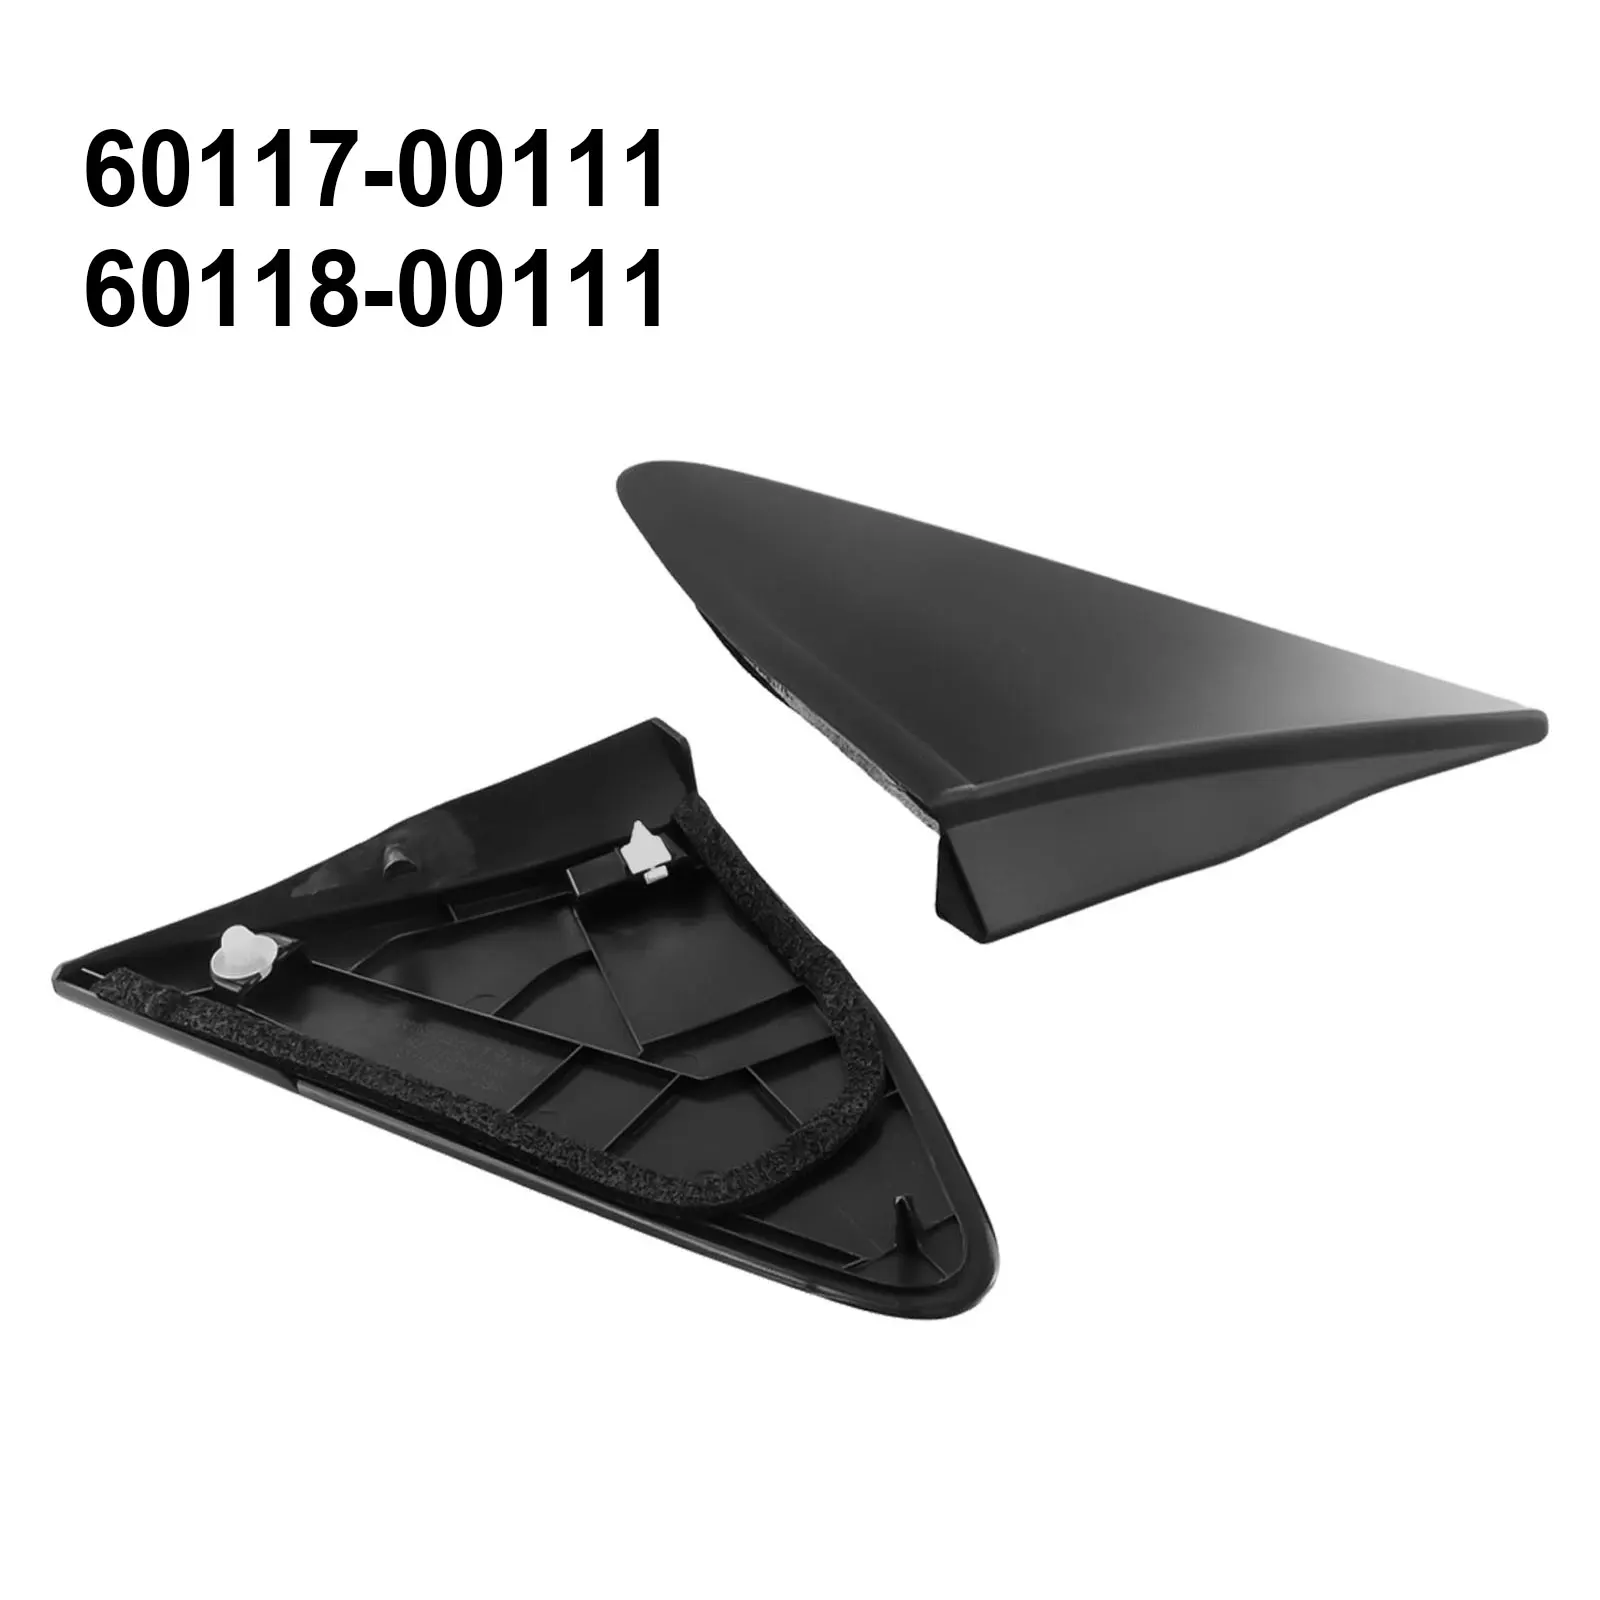 

2Pcs Front Rearview Mirror Triangle Cover Trim For Toyota For Yaris 2012-2014 60117-0D111 60118-0D111 Replace Accessories